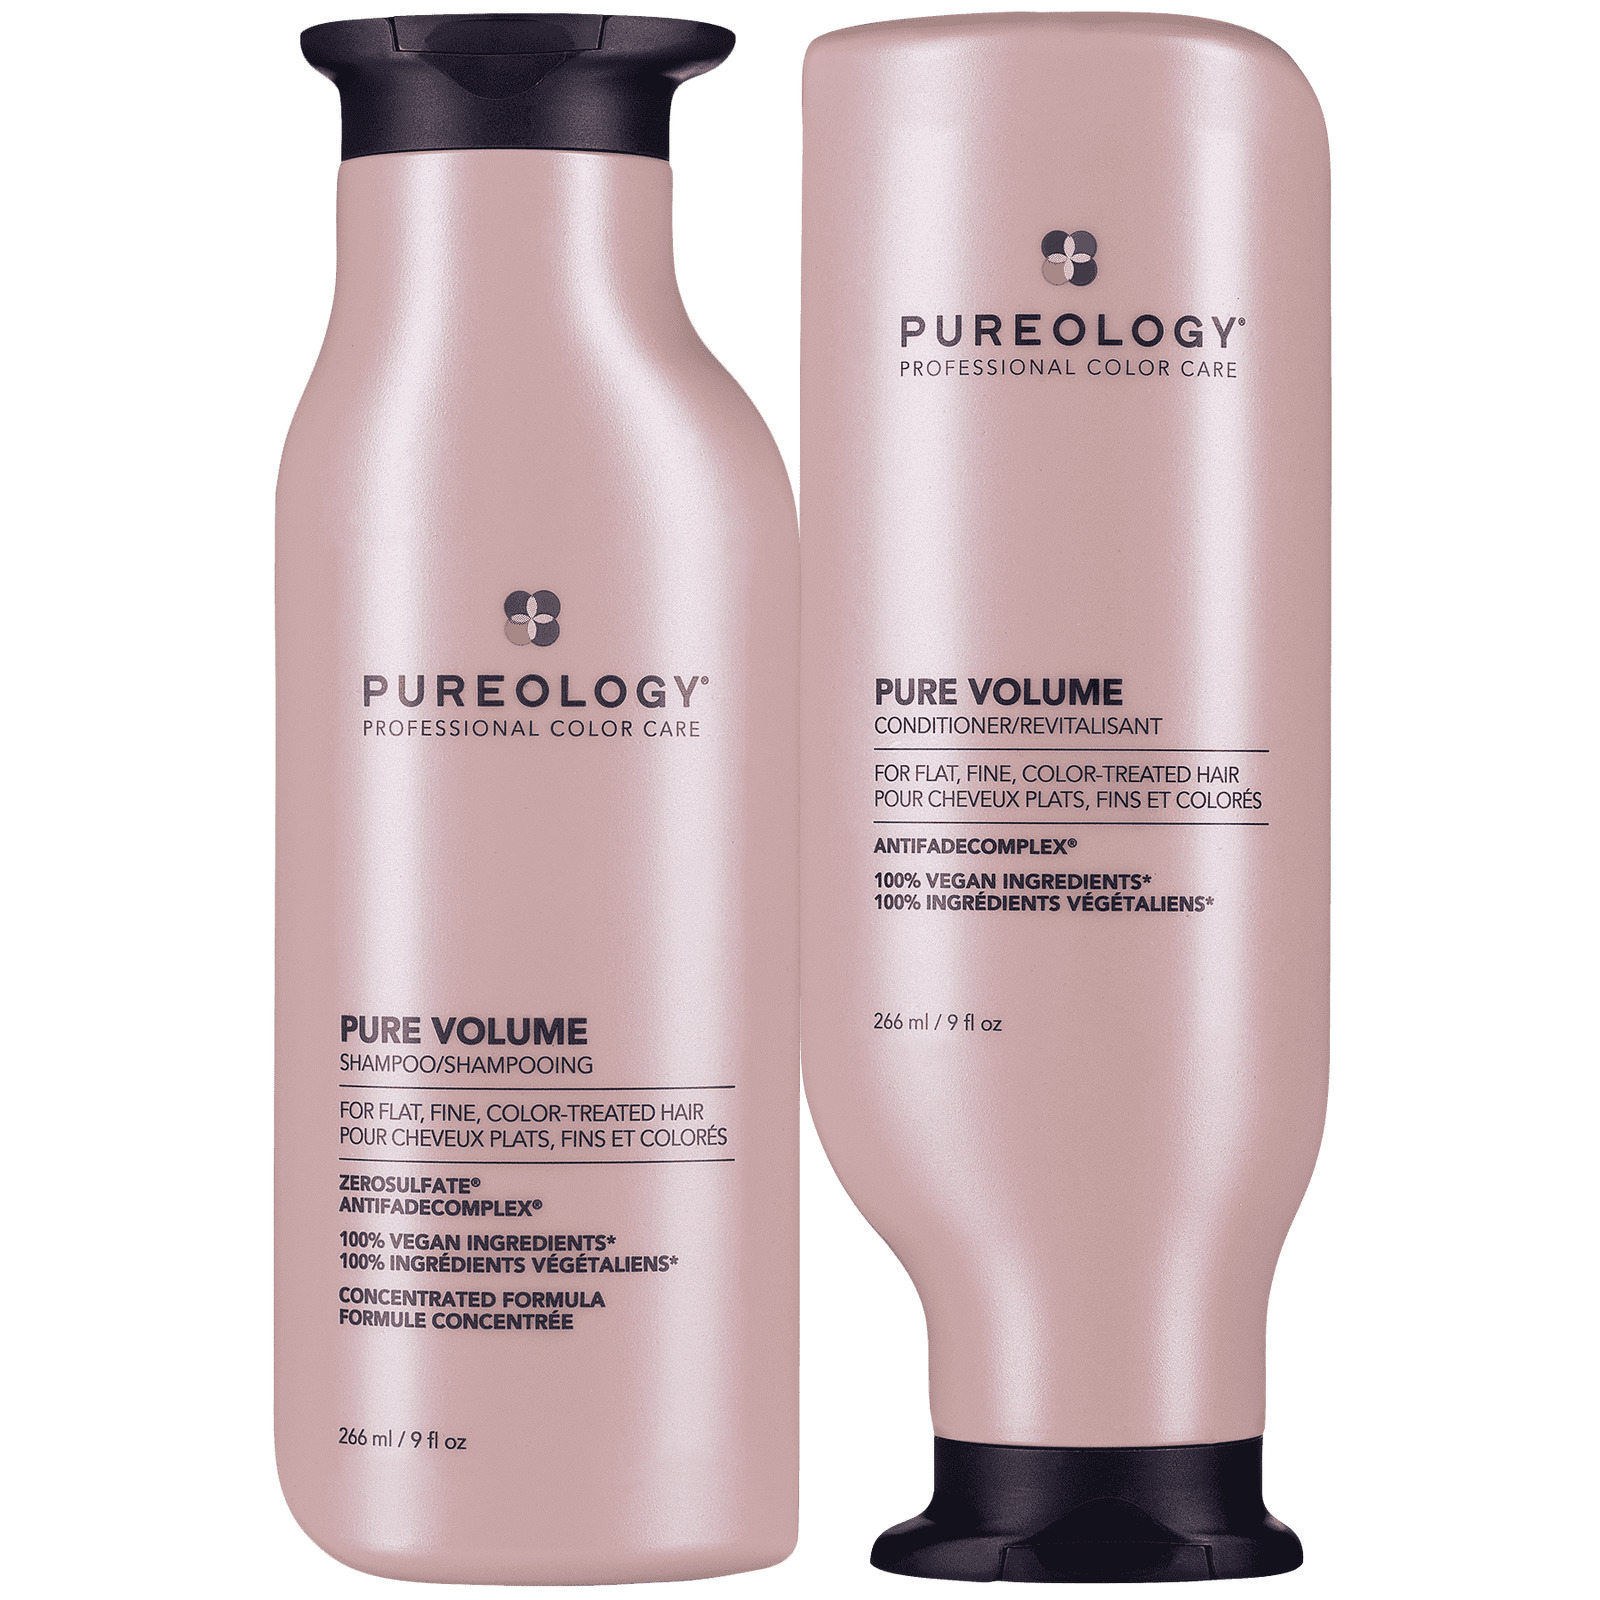 Pureology Pure Volume Shampoo and Conditioner Duo Set (9 OZ EACH)